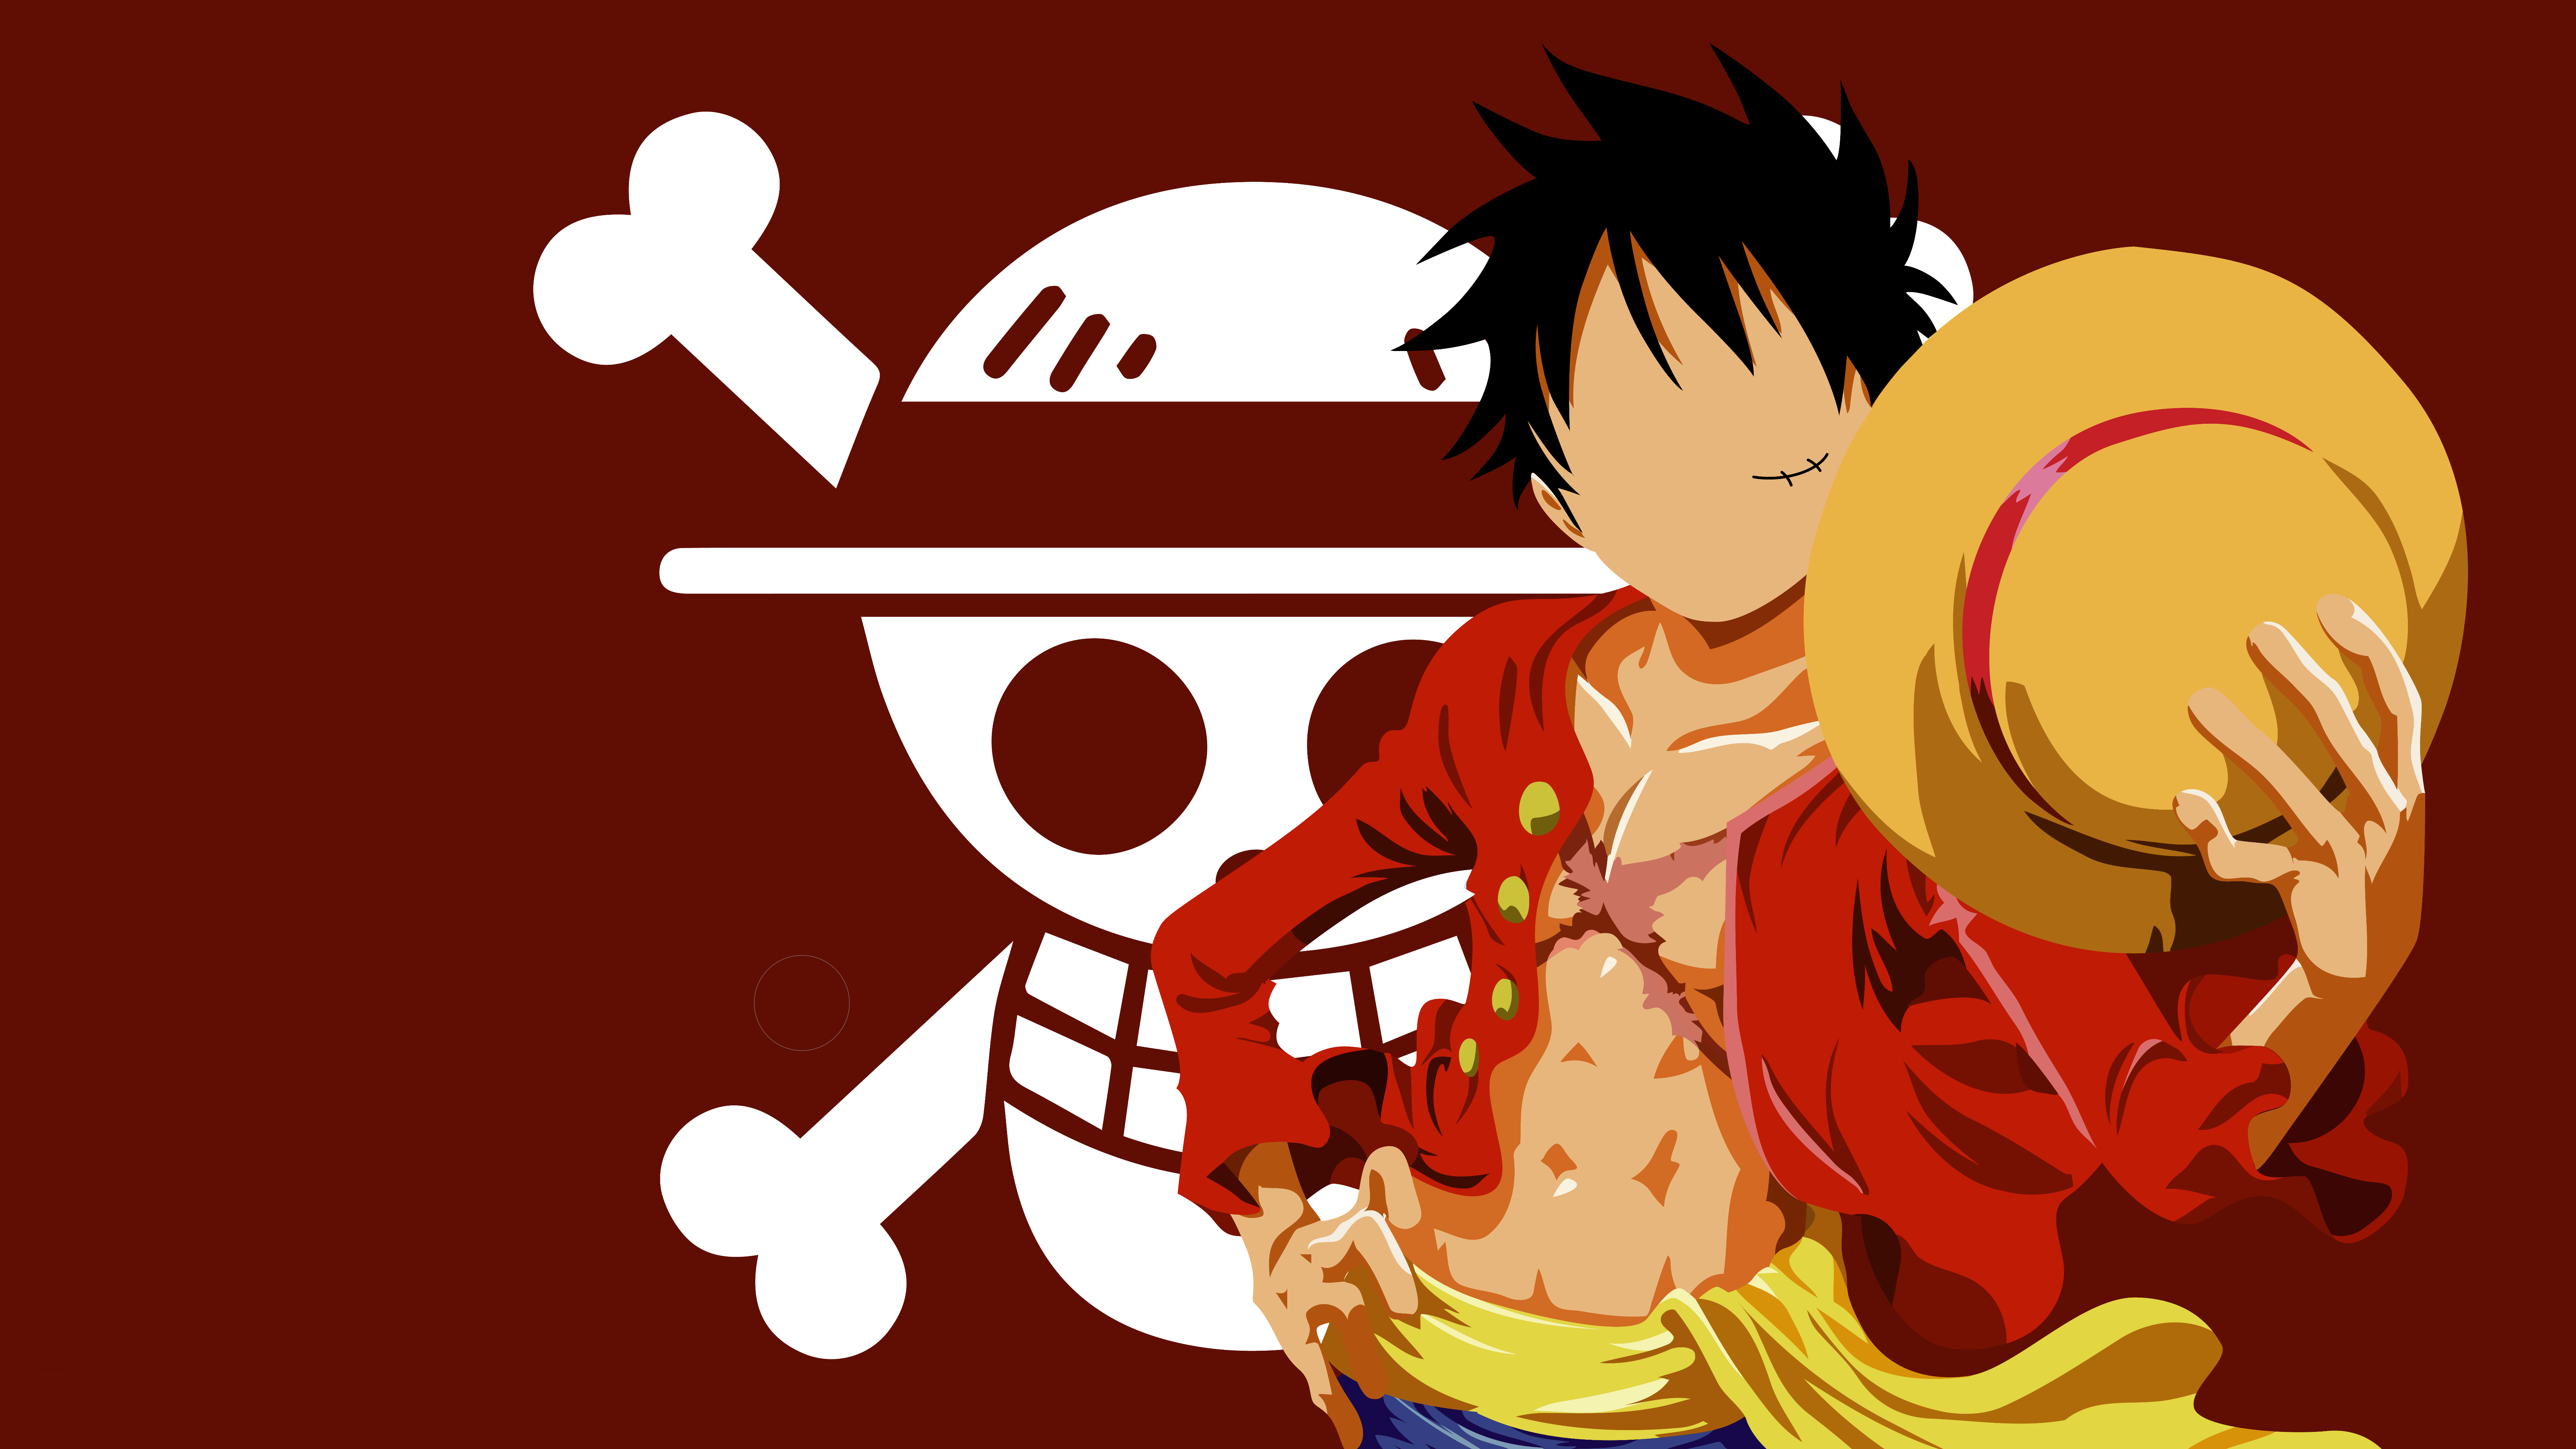 Anime One Piece 8k Ultra HD Wallpaper by Amanomoon